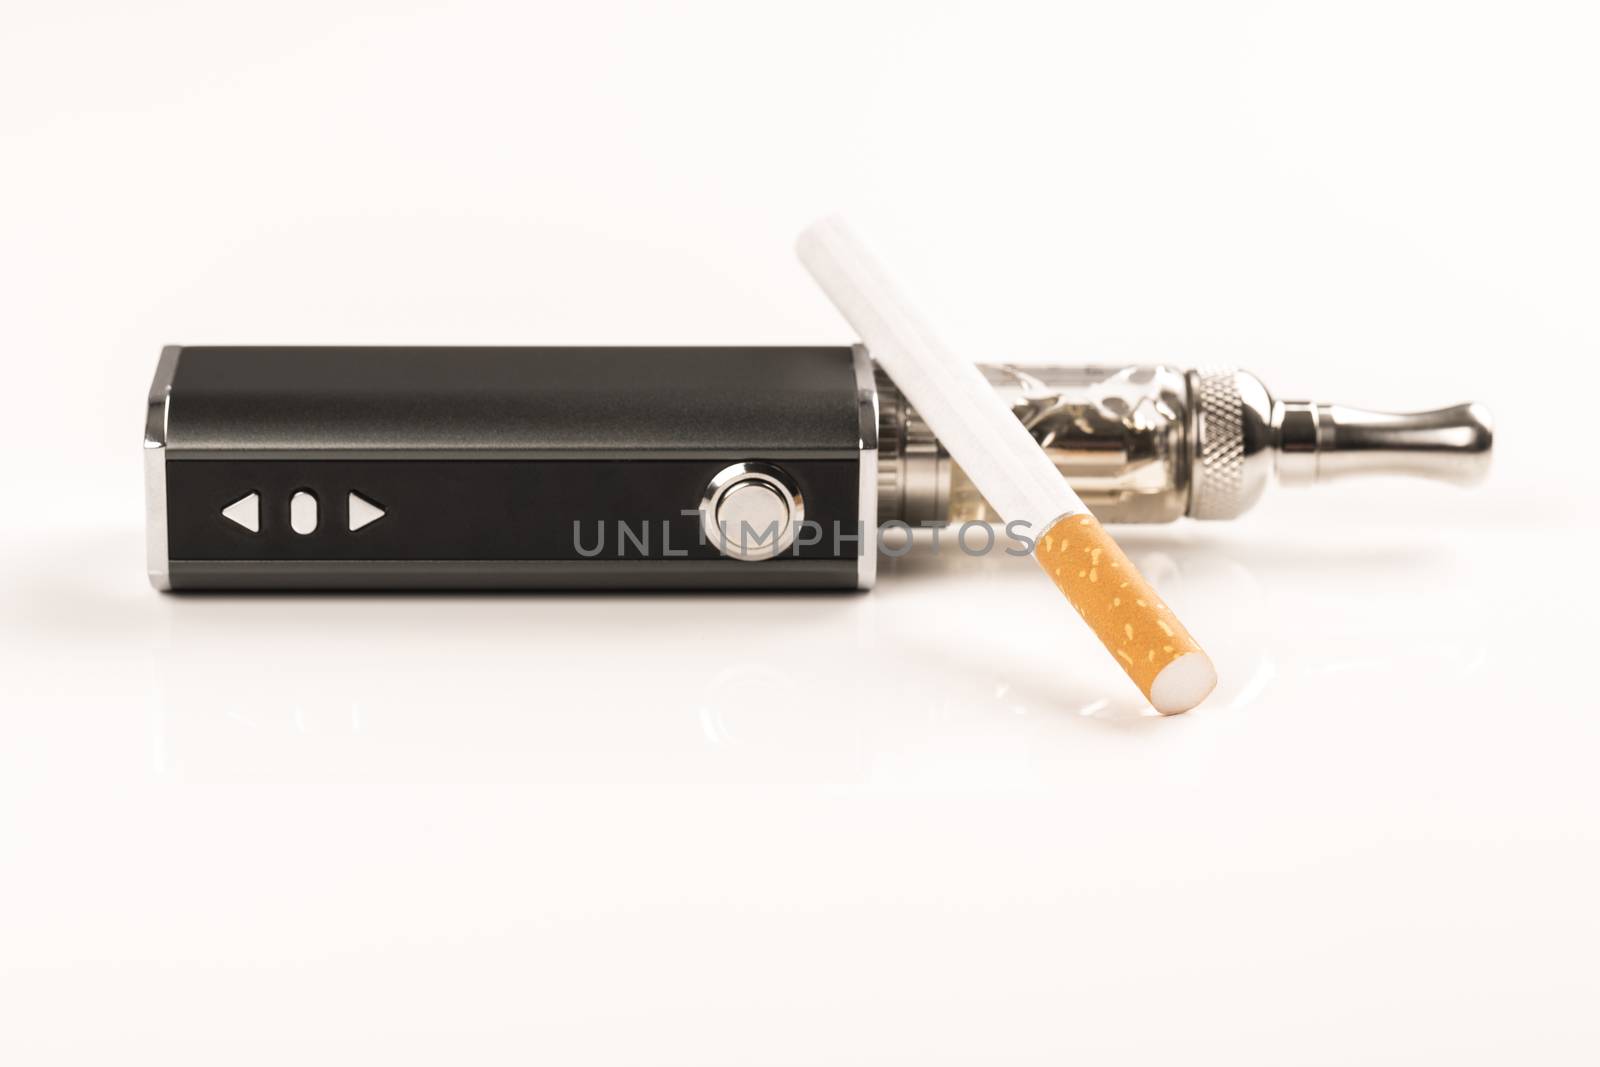 electronic cigarettes and tabacco on white background by CatherineL-Prod